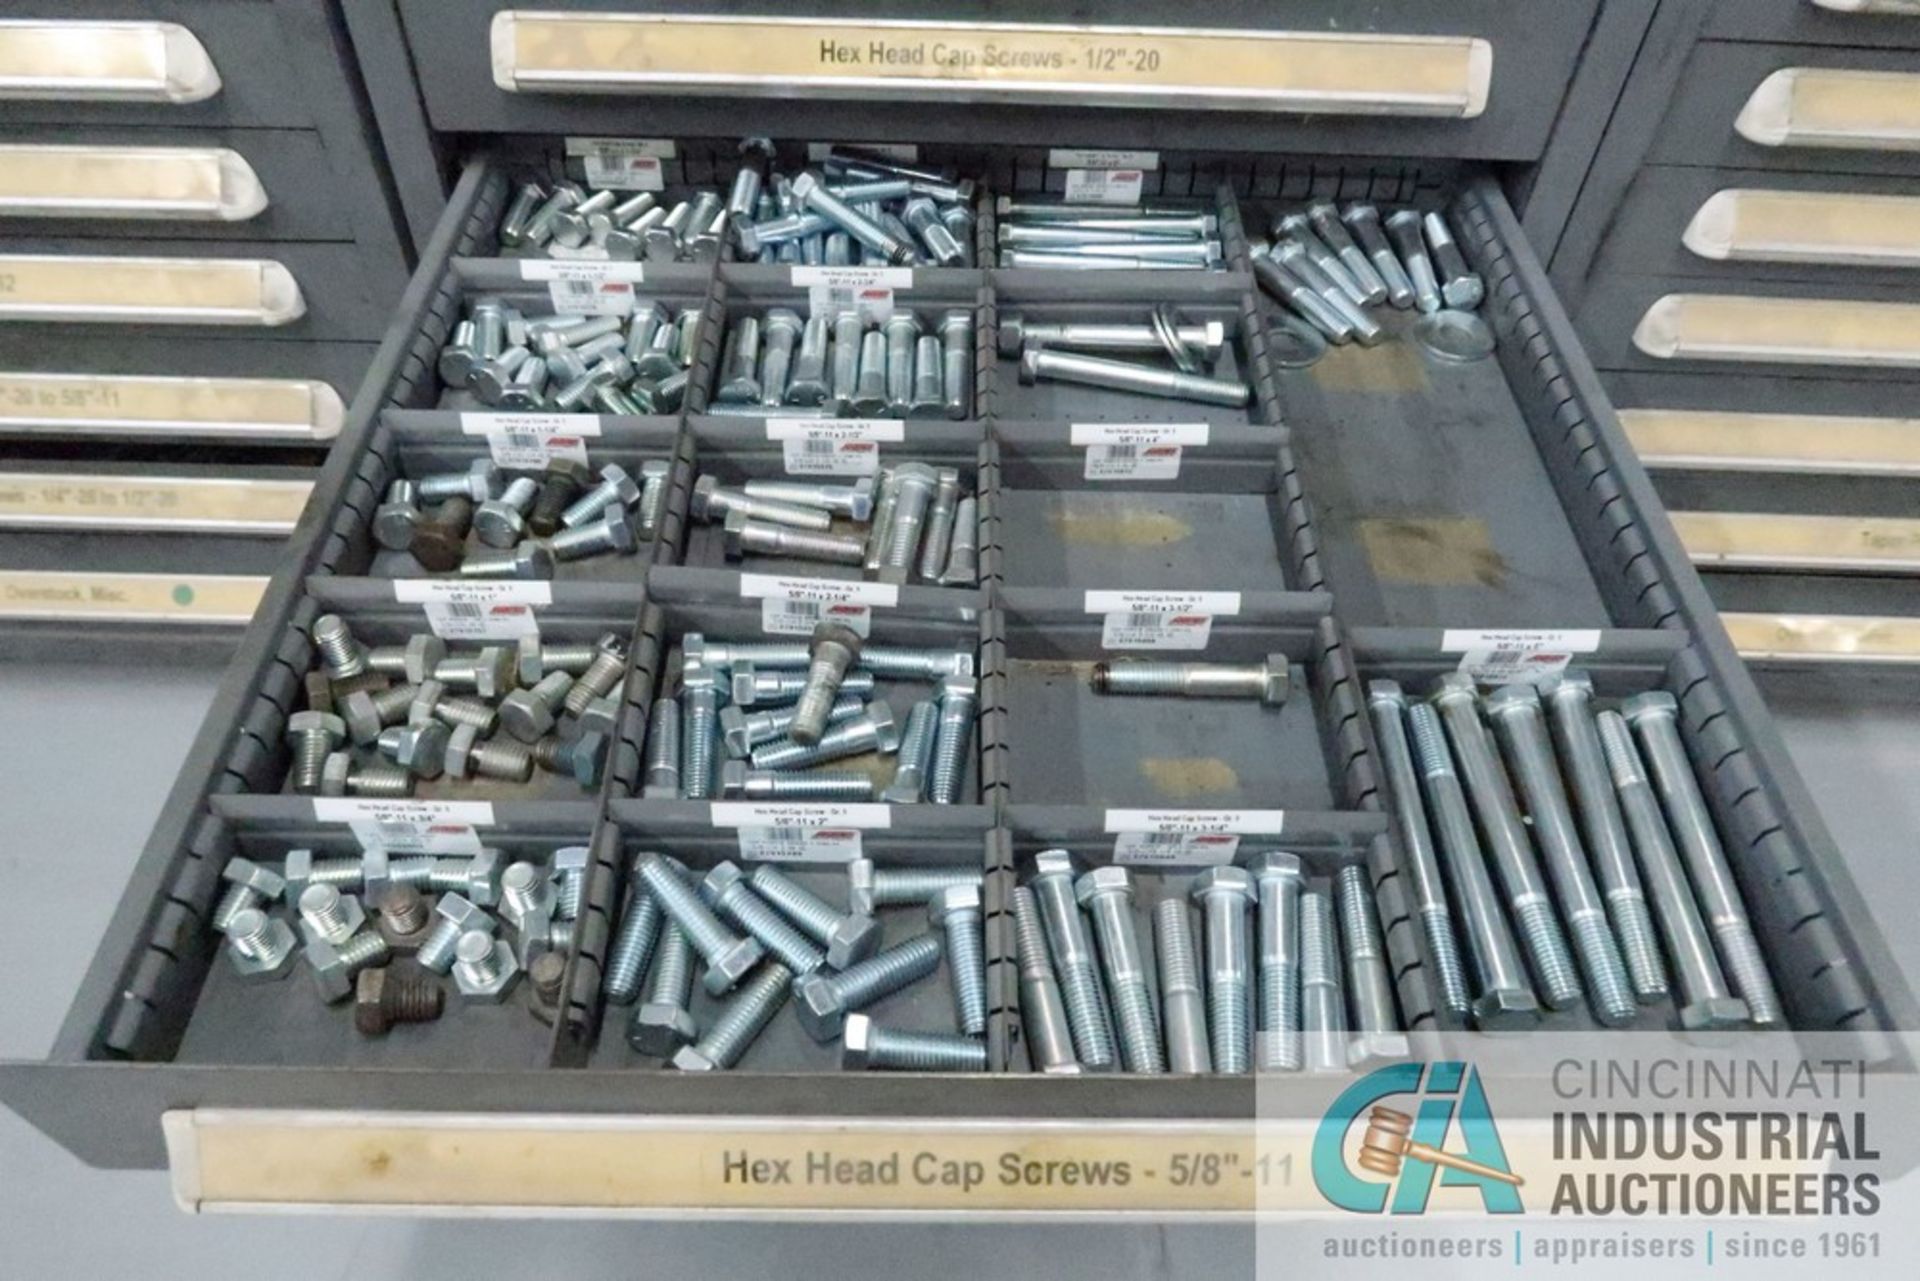 (LOT) 13-DRAWER VIDMAR CABINET WITH CONTENTS INCLUDING HEX HEAD CAP SCREWS (CABINET 7) - Image 11 of 14